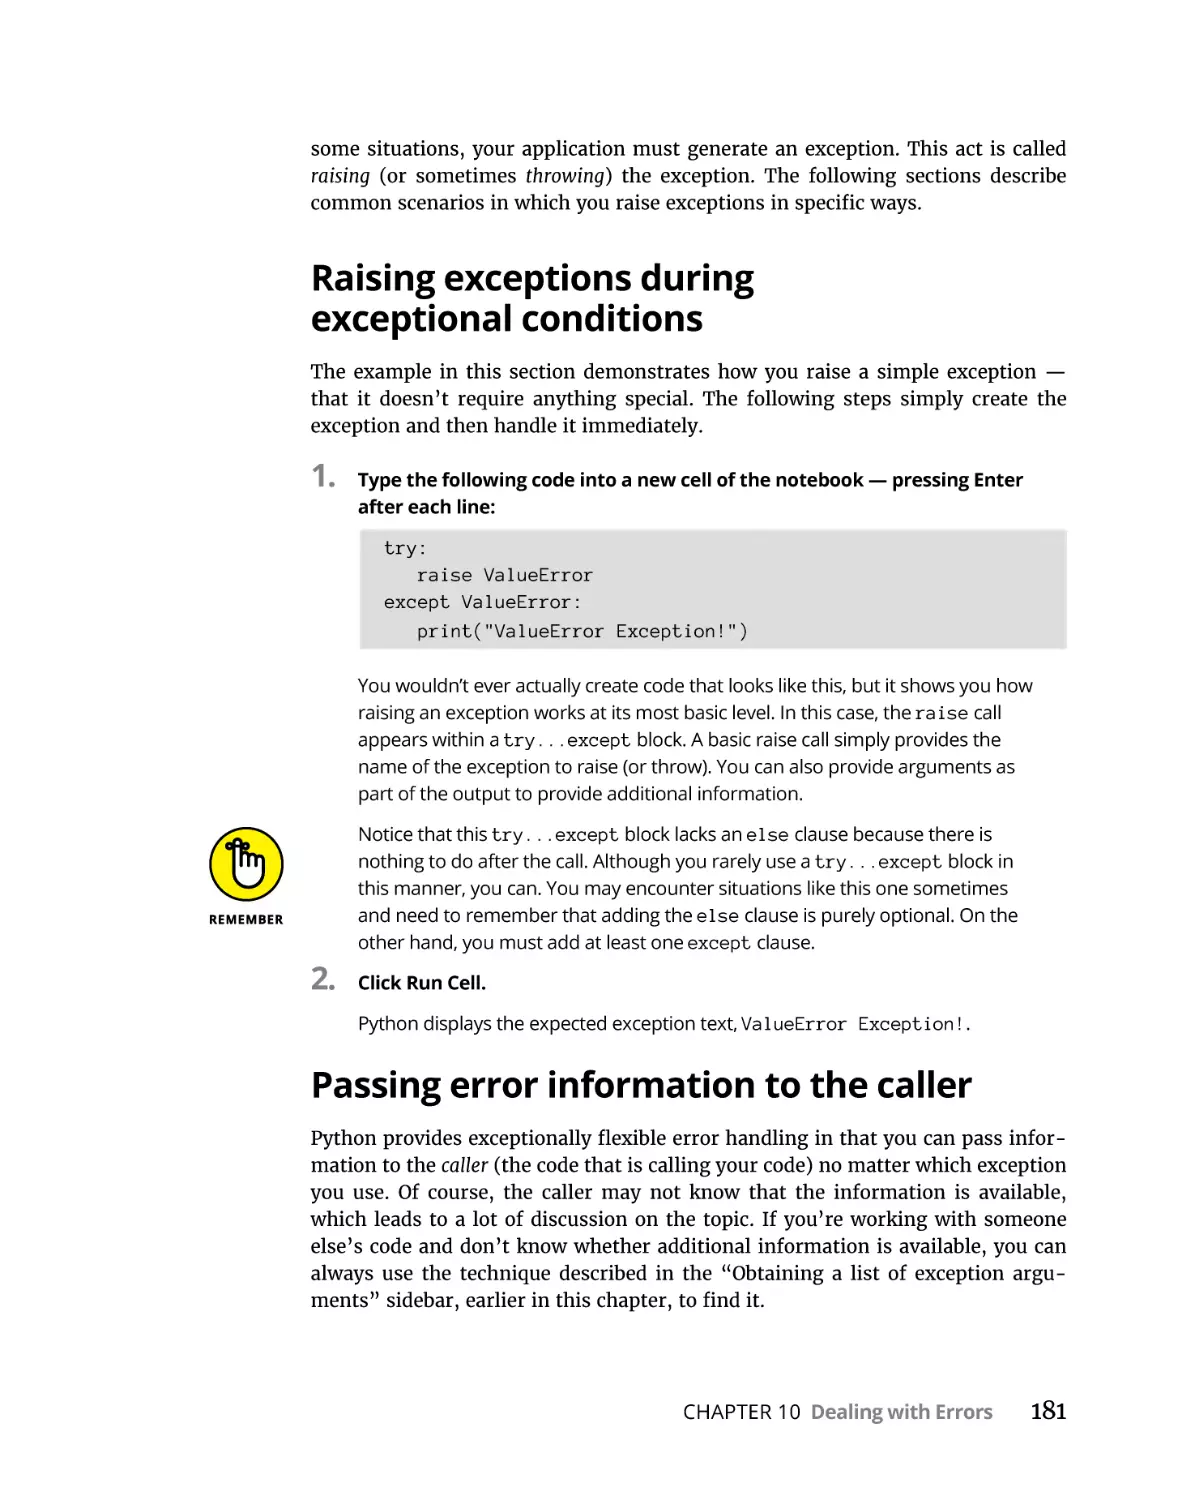 Raising exceptions during exceptional conditions
Passing error information to the caller